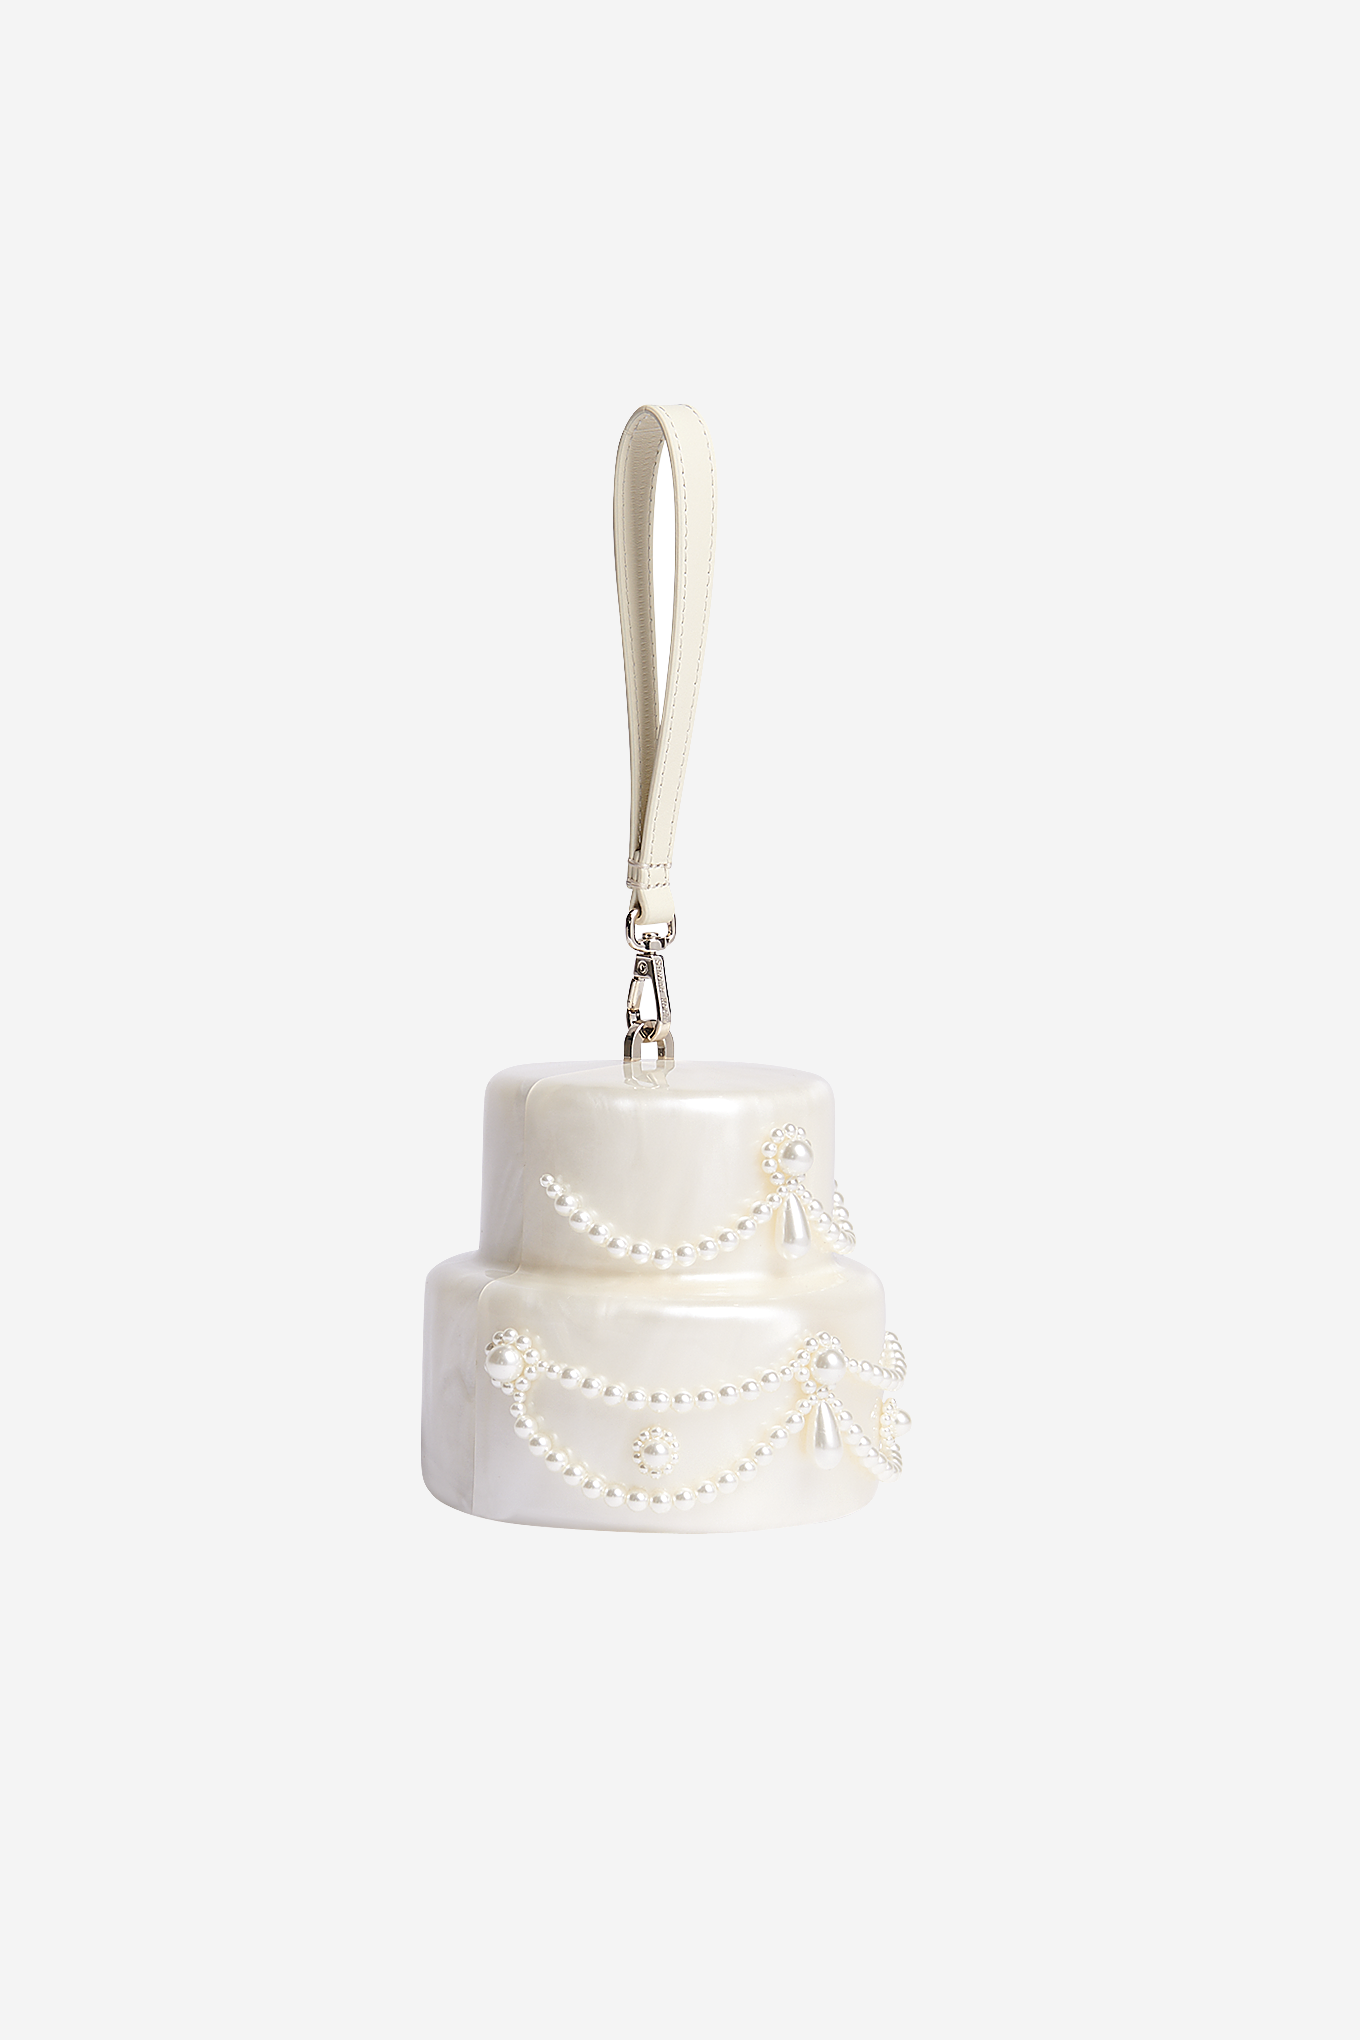 Cake Purse: Over 385 Royalty-Free Licensable Stock Photos | Shutterstock